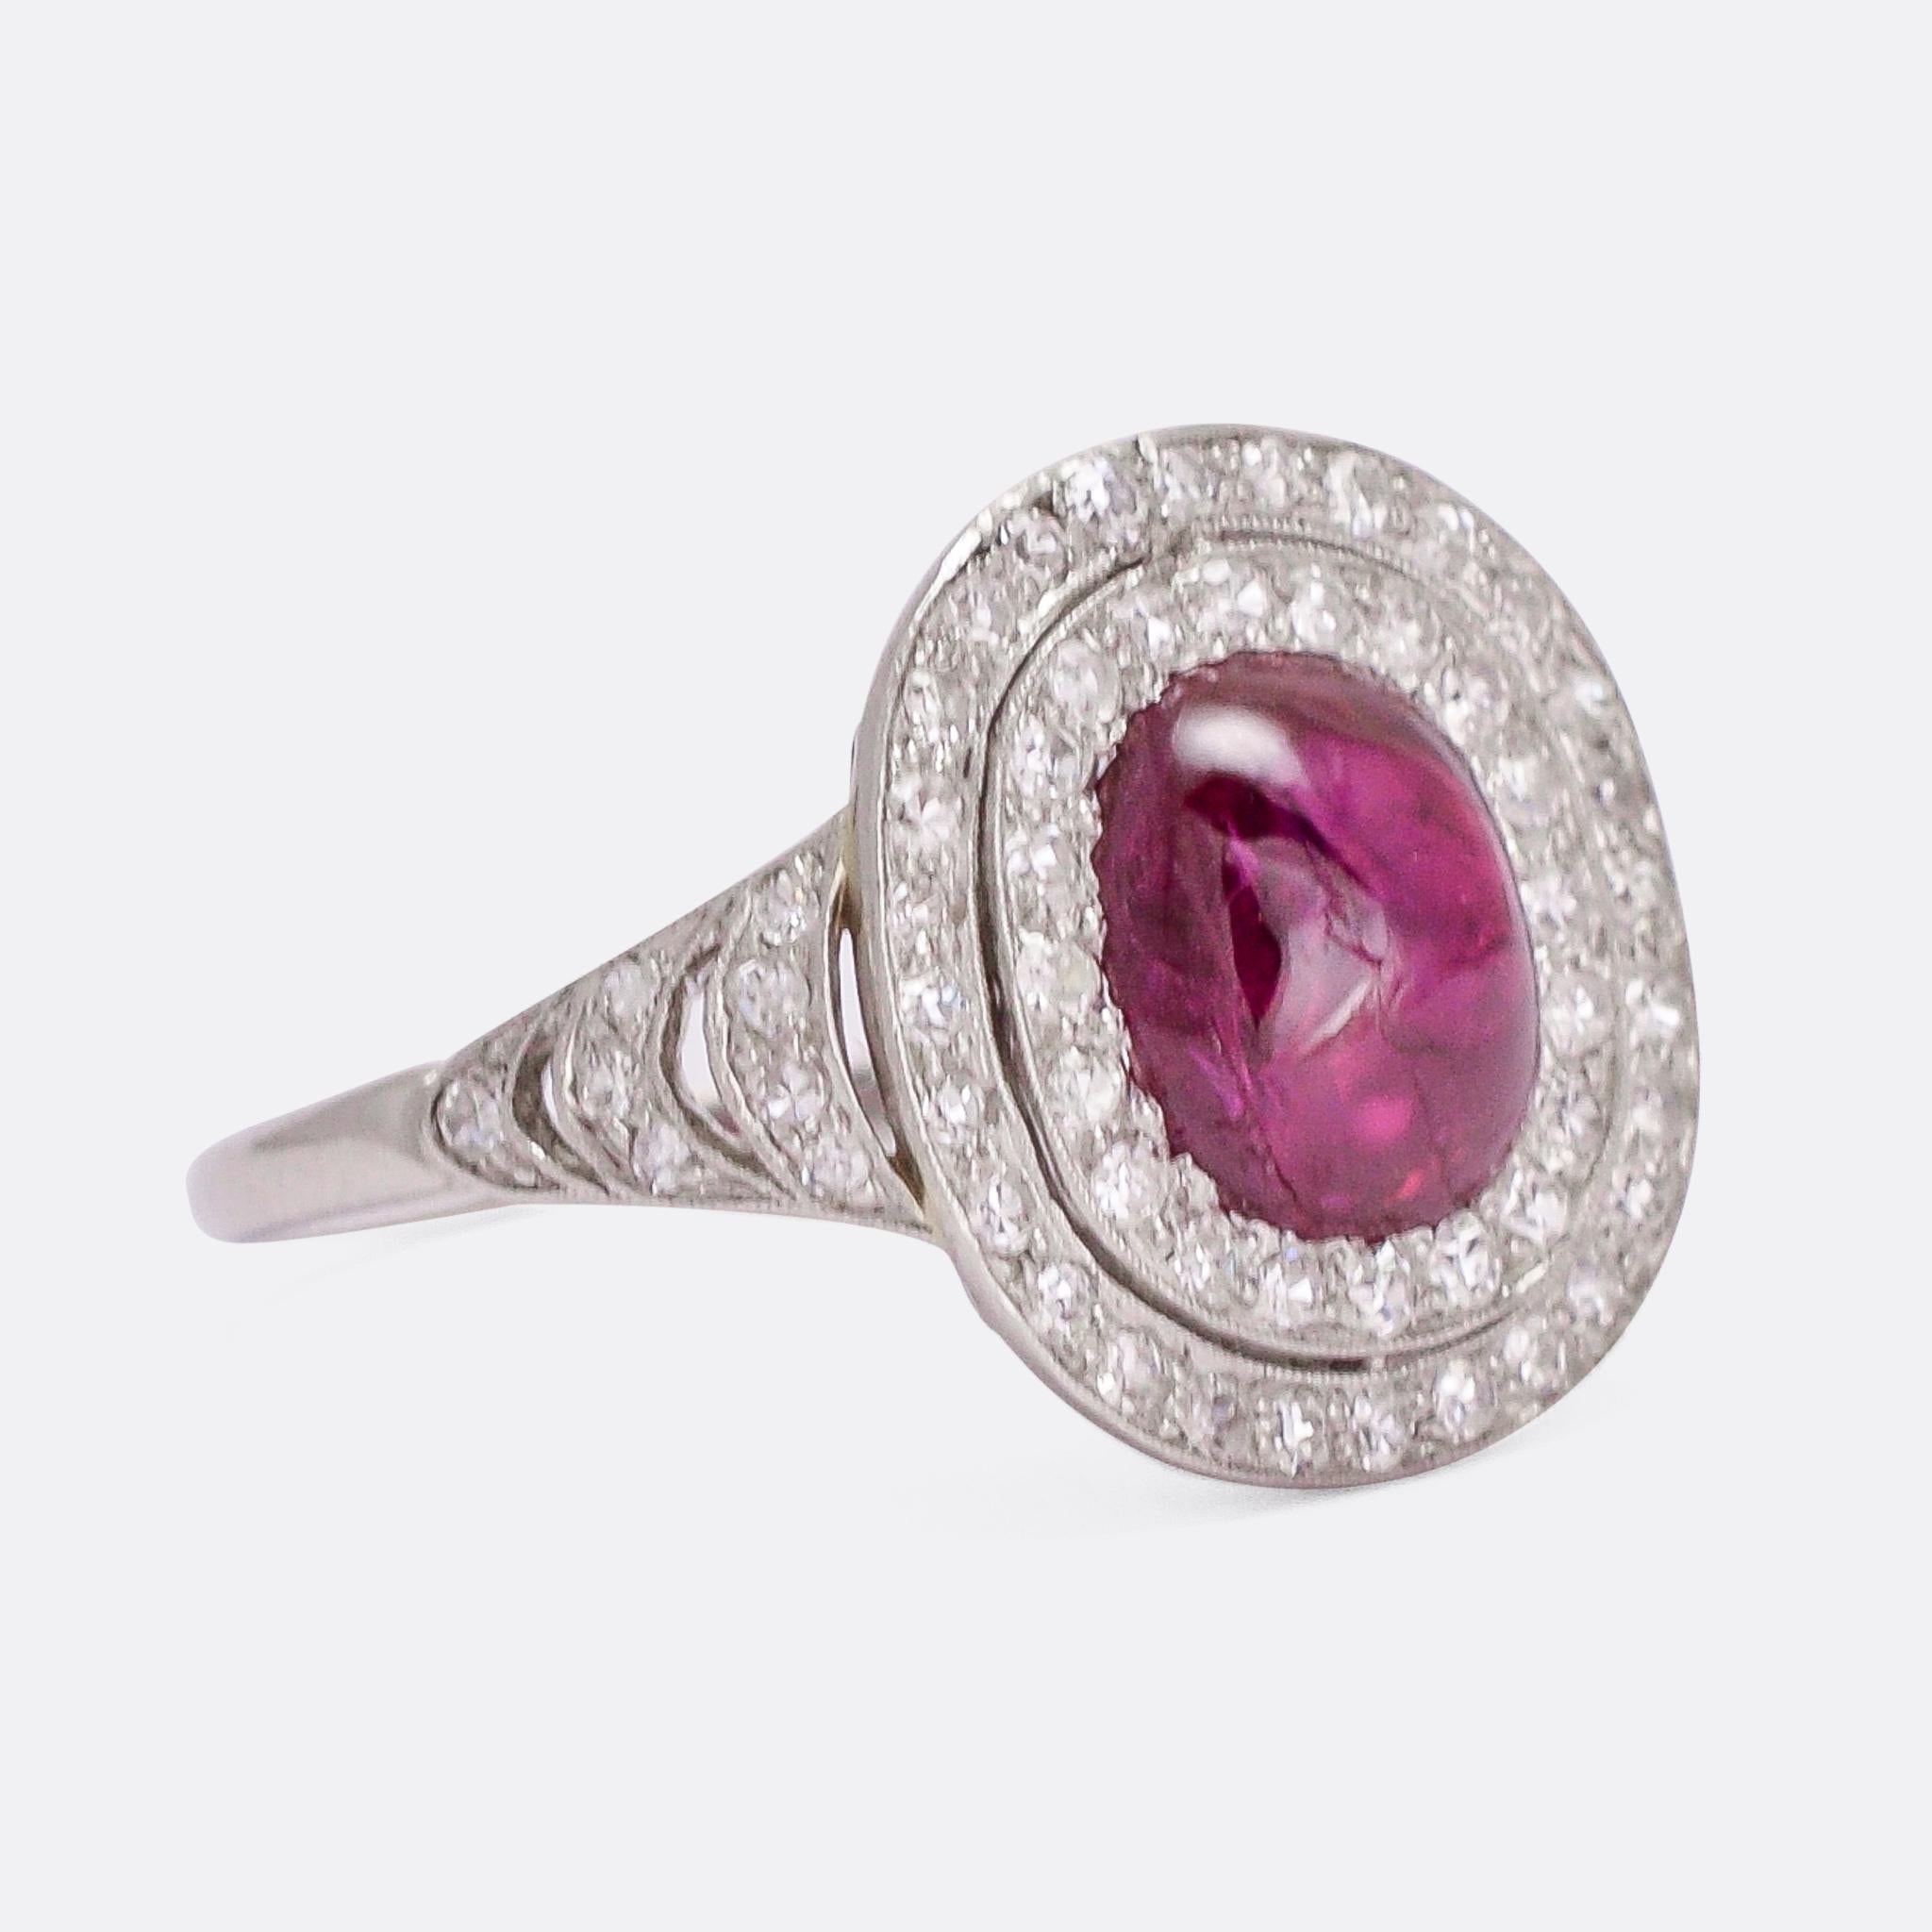 A superb 1920s cluster ring set with a principal Burma Ruby, within a double halo of white diamonds. The main stone is cut en cabochon, with an estimated weight of 3.1 carats. The settings are finished in fine millegrain detailing, and the shoulders